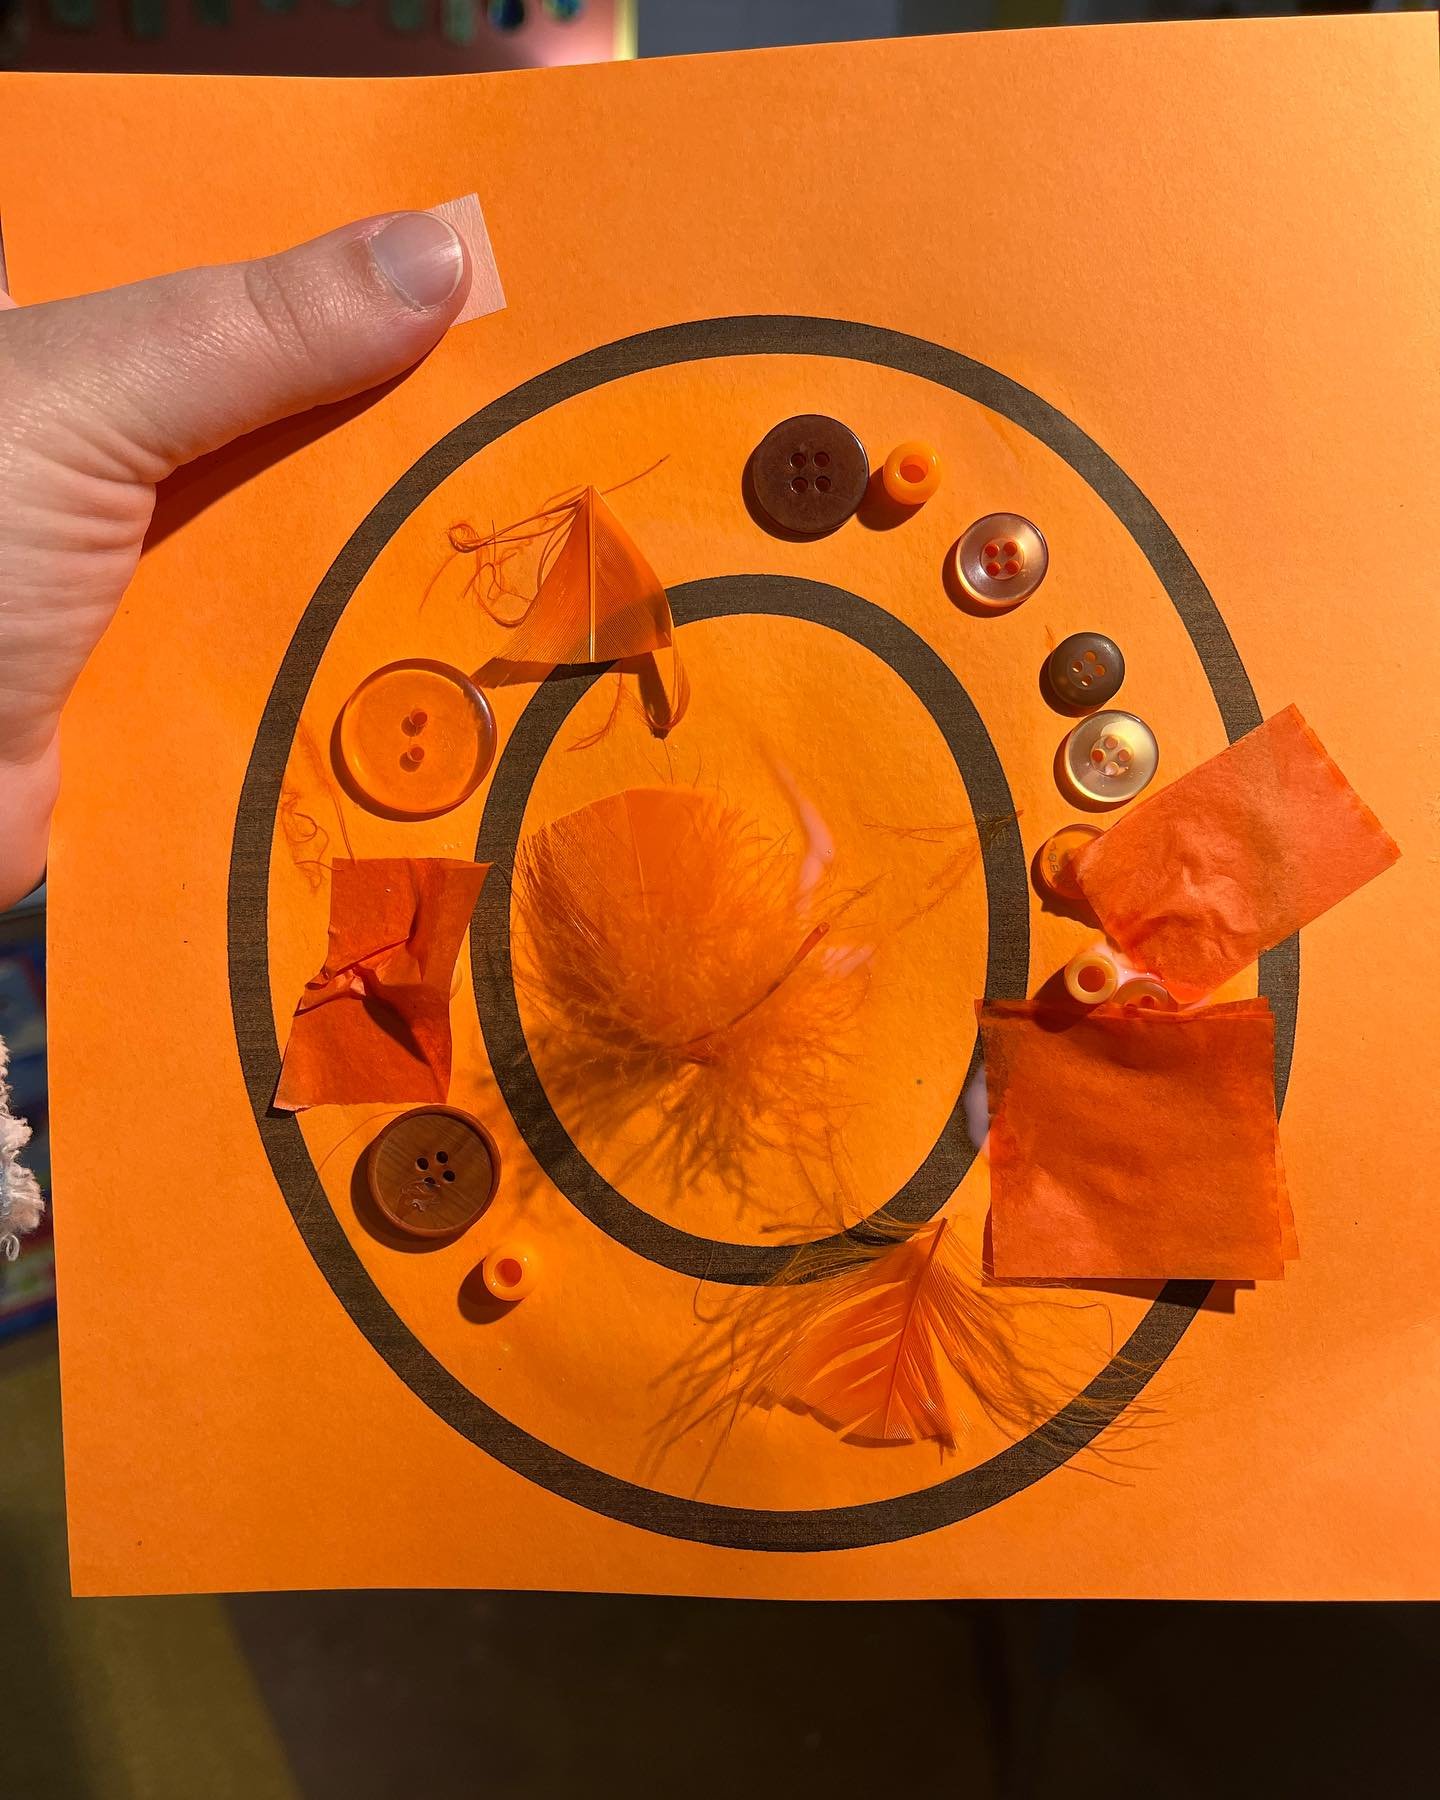 Letter O is for orange &amp; ostrich. 

#tigerlilypreschool #preschoolart #letteroftheweek #halfdaypreschool #seattlepreschool #northseattlepreschool #shorelinepreschool 

Want to learn more about our program? Visit our website to learn more and sche